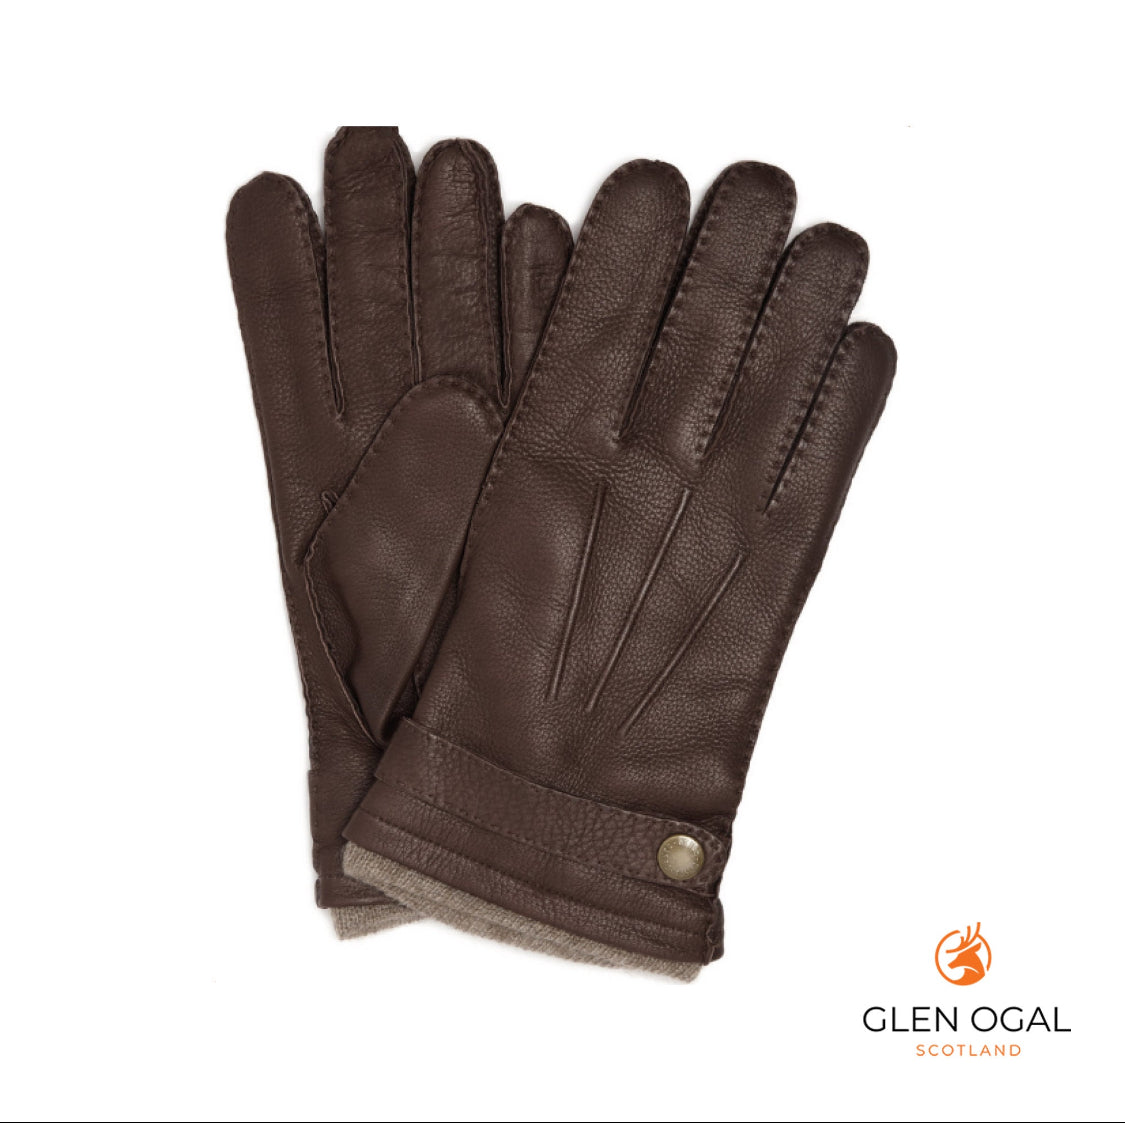 Luxurious Handcrafted Scottish Deer Skin Brown Leather Gloves - Timeless Elegance in a Deluxe Gift Box